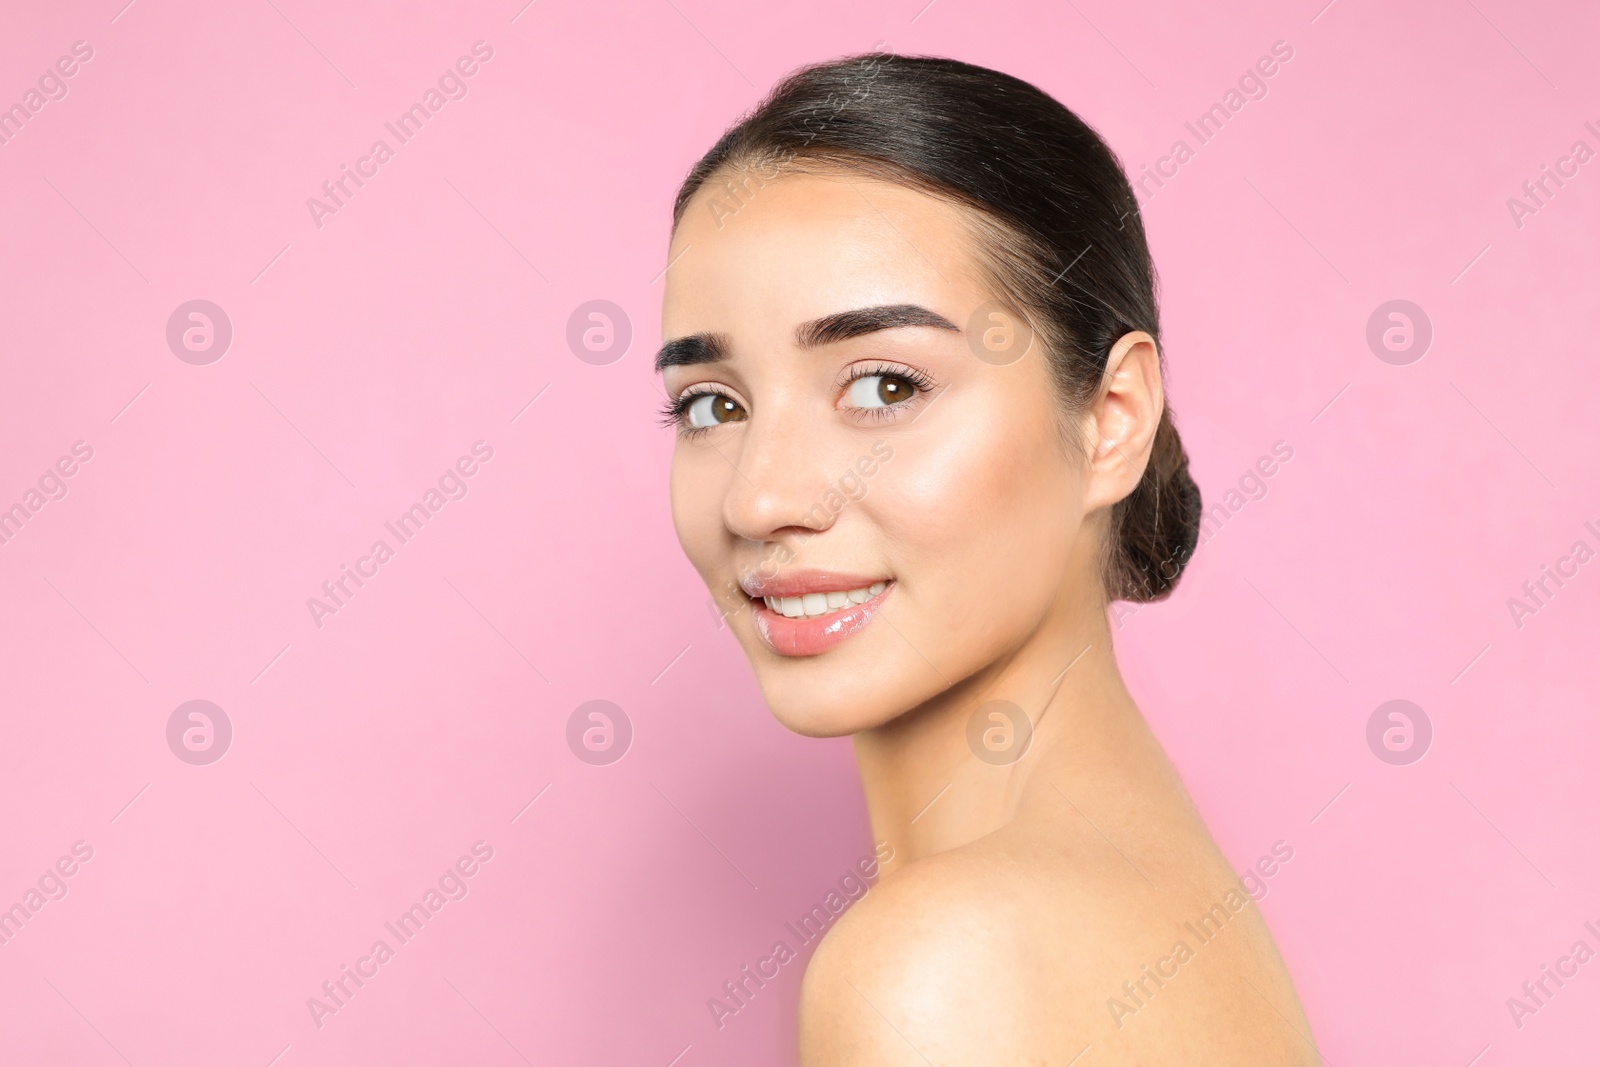 Photo of Portrait of young woman with beautiful face against color background. Space for text